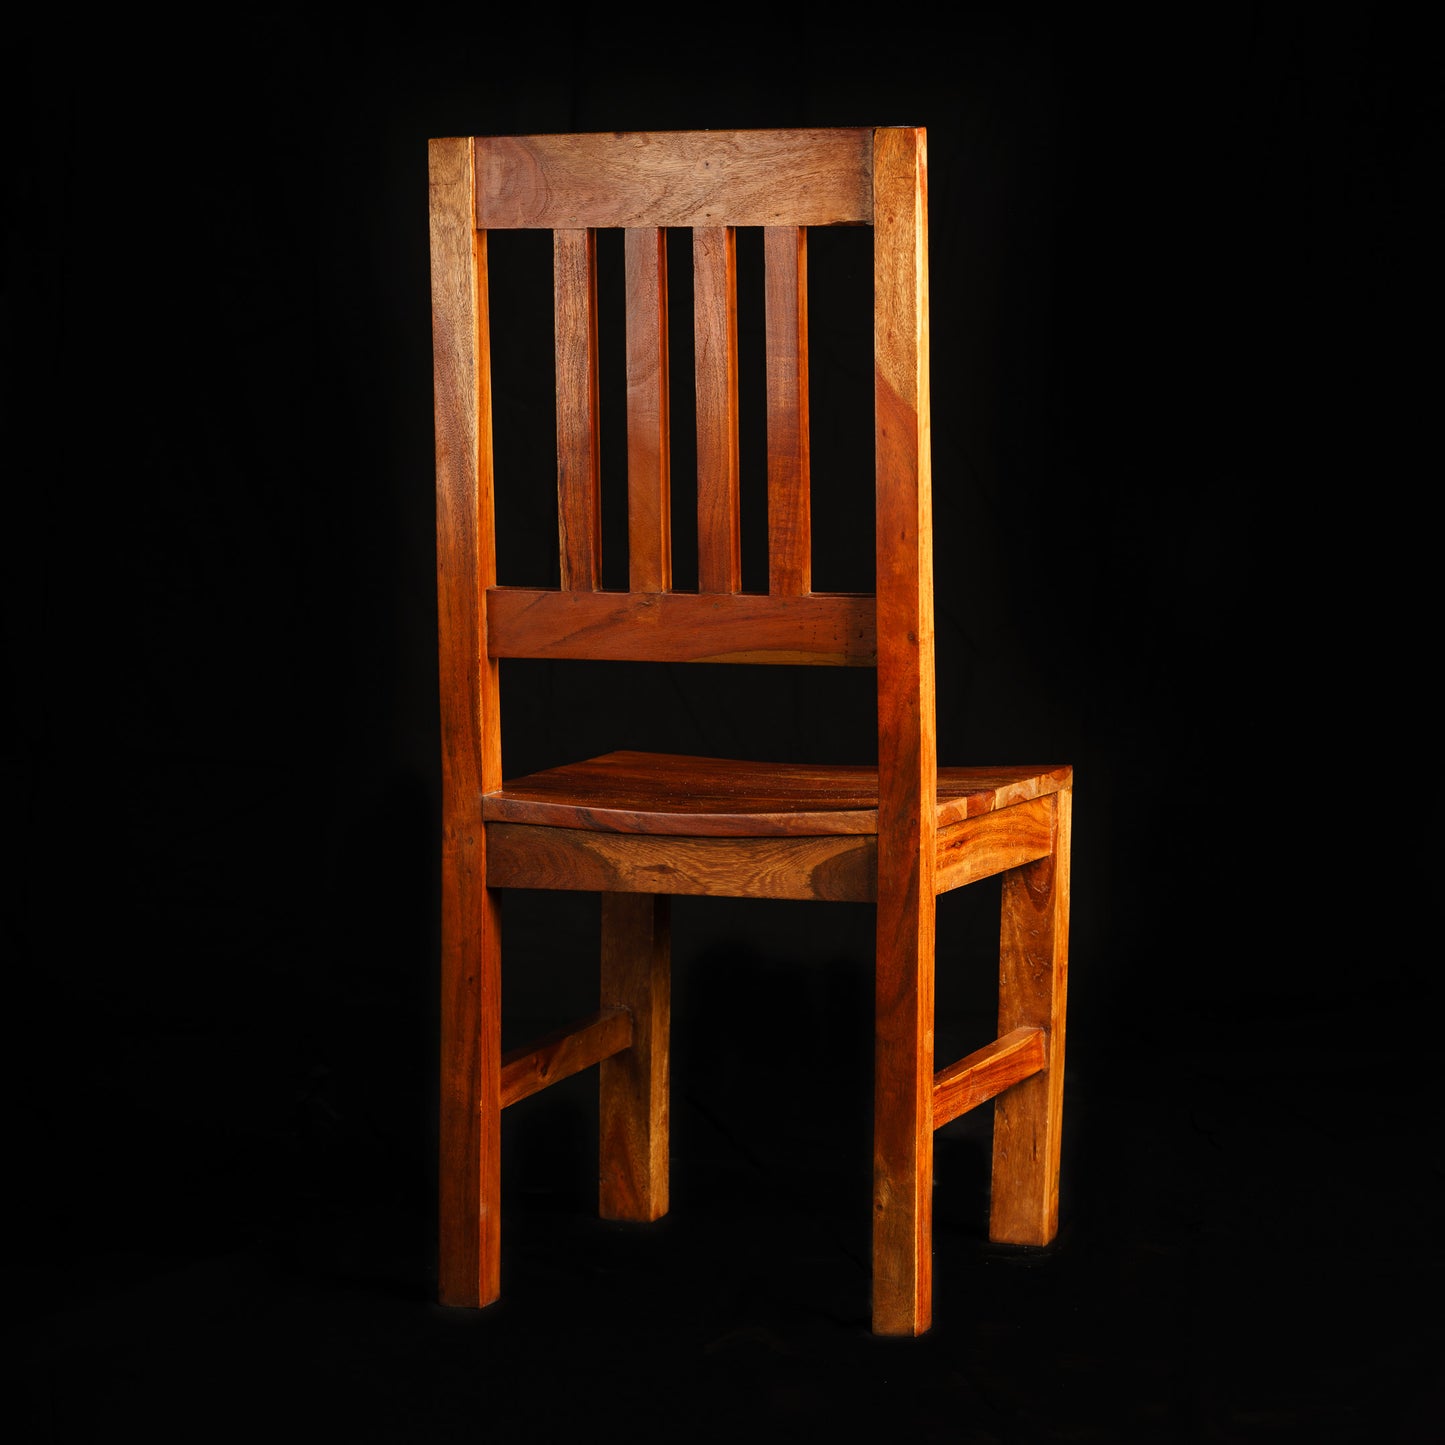 Solid Wood Dining Chairs